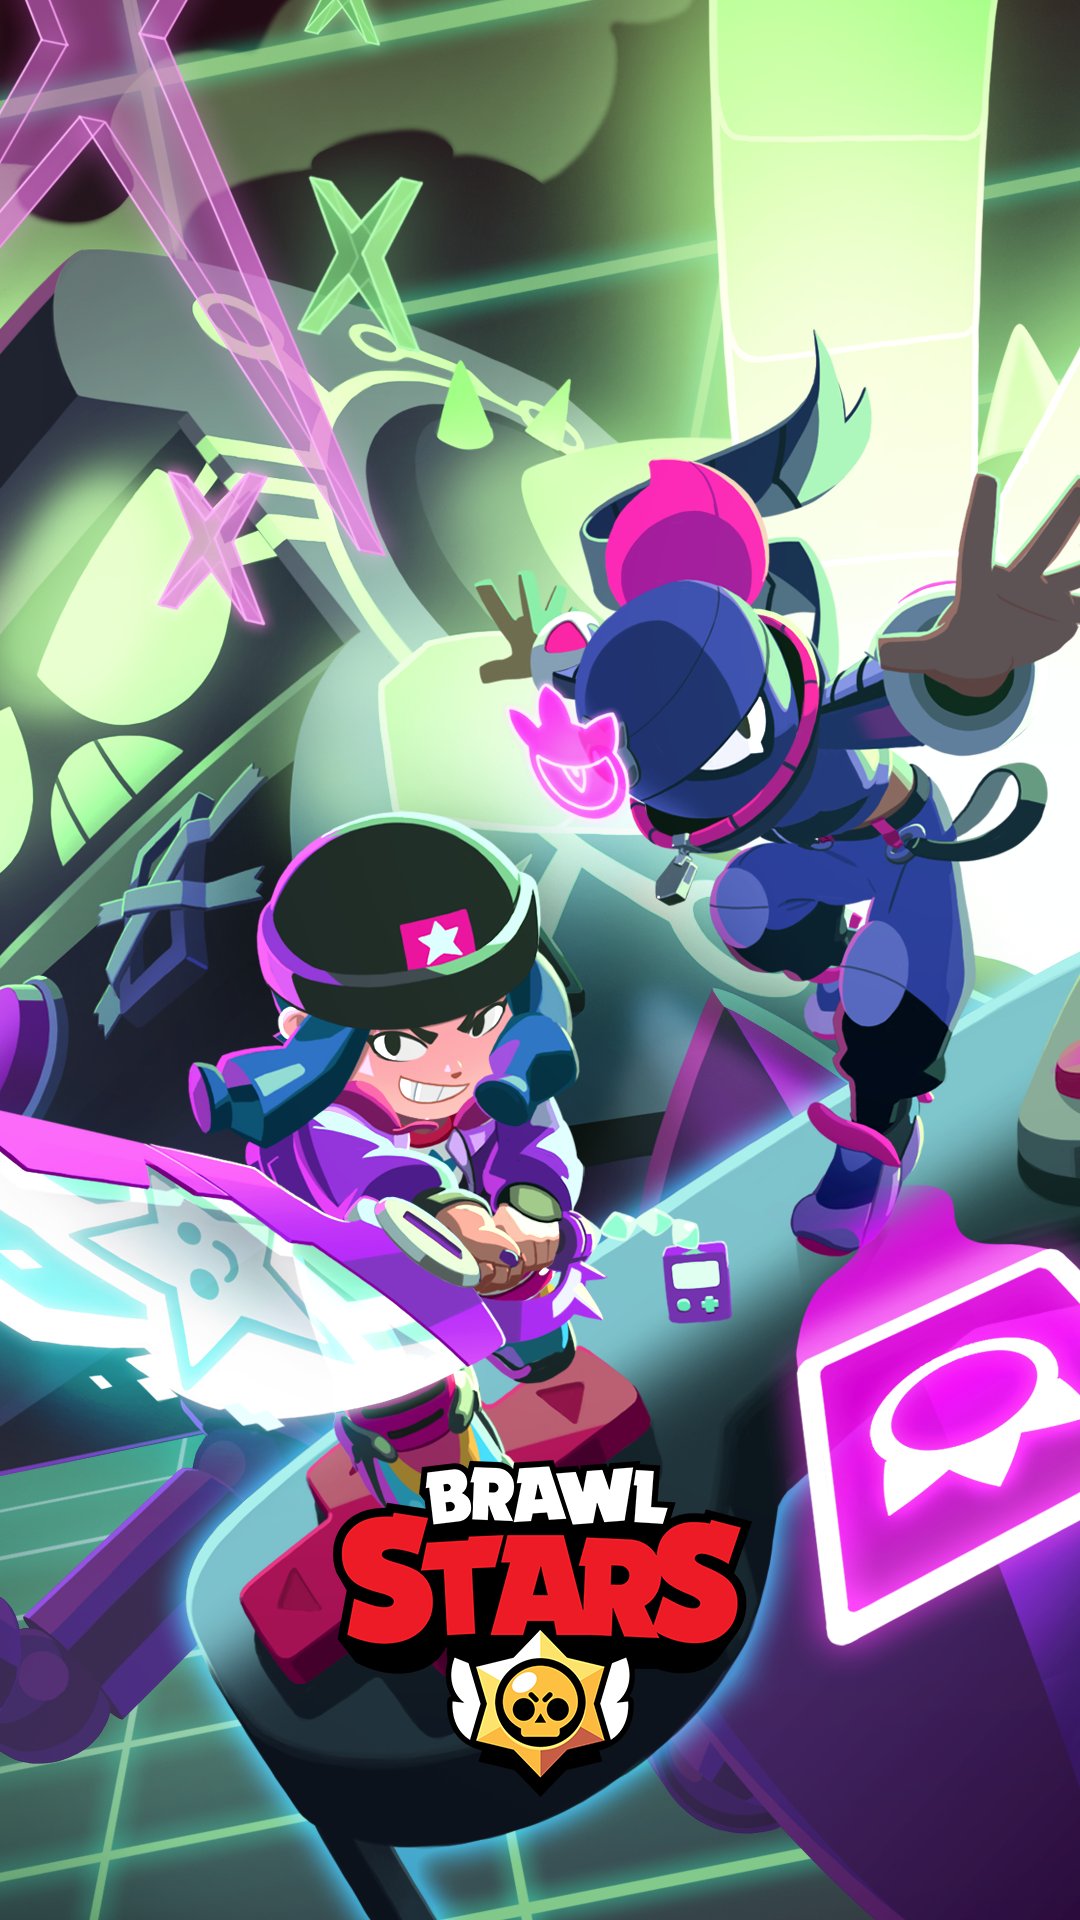 Brawl Stars On Twitter How About A New Wallpaper For Your Phone - wallpaper brawl star